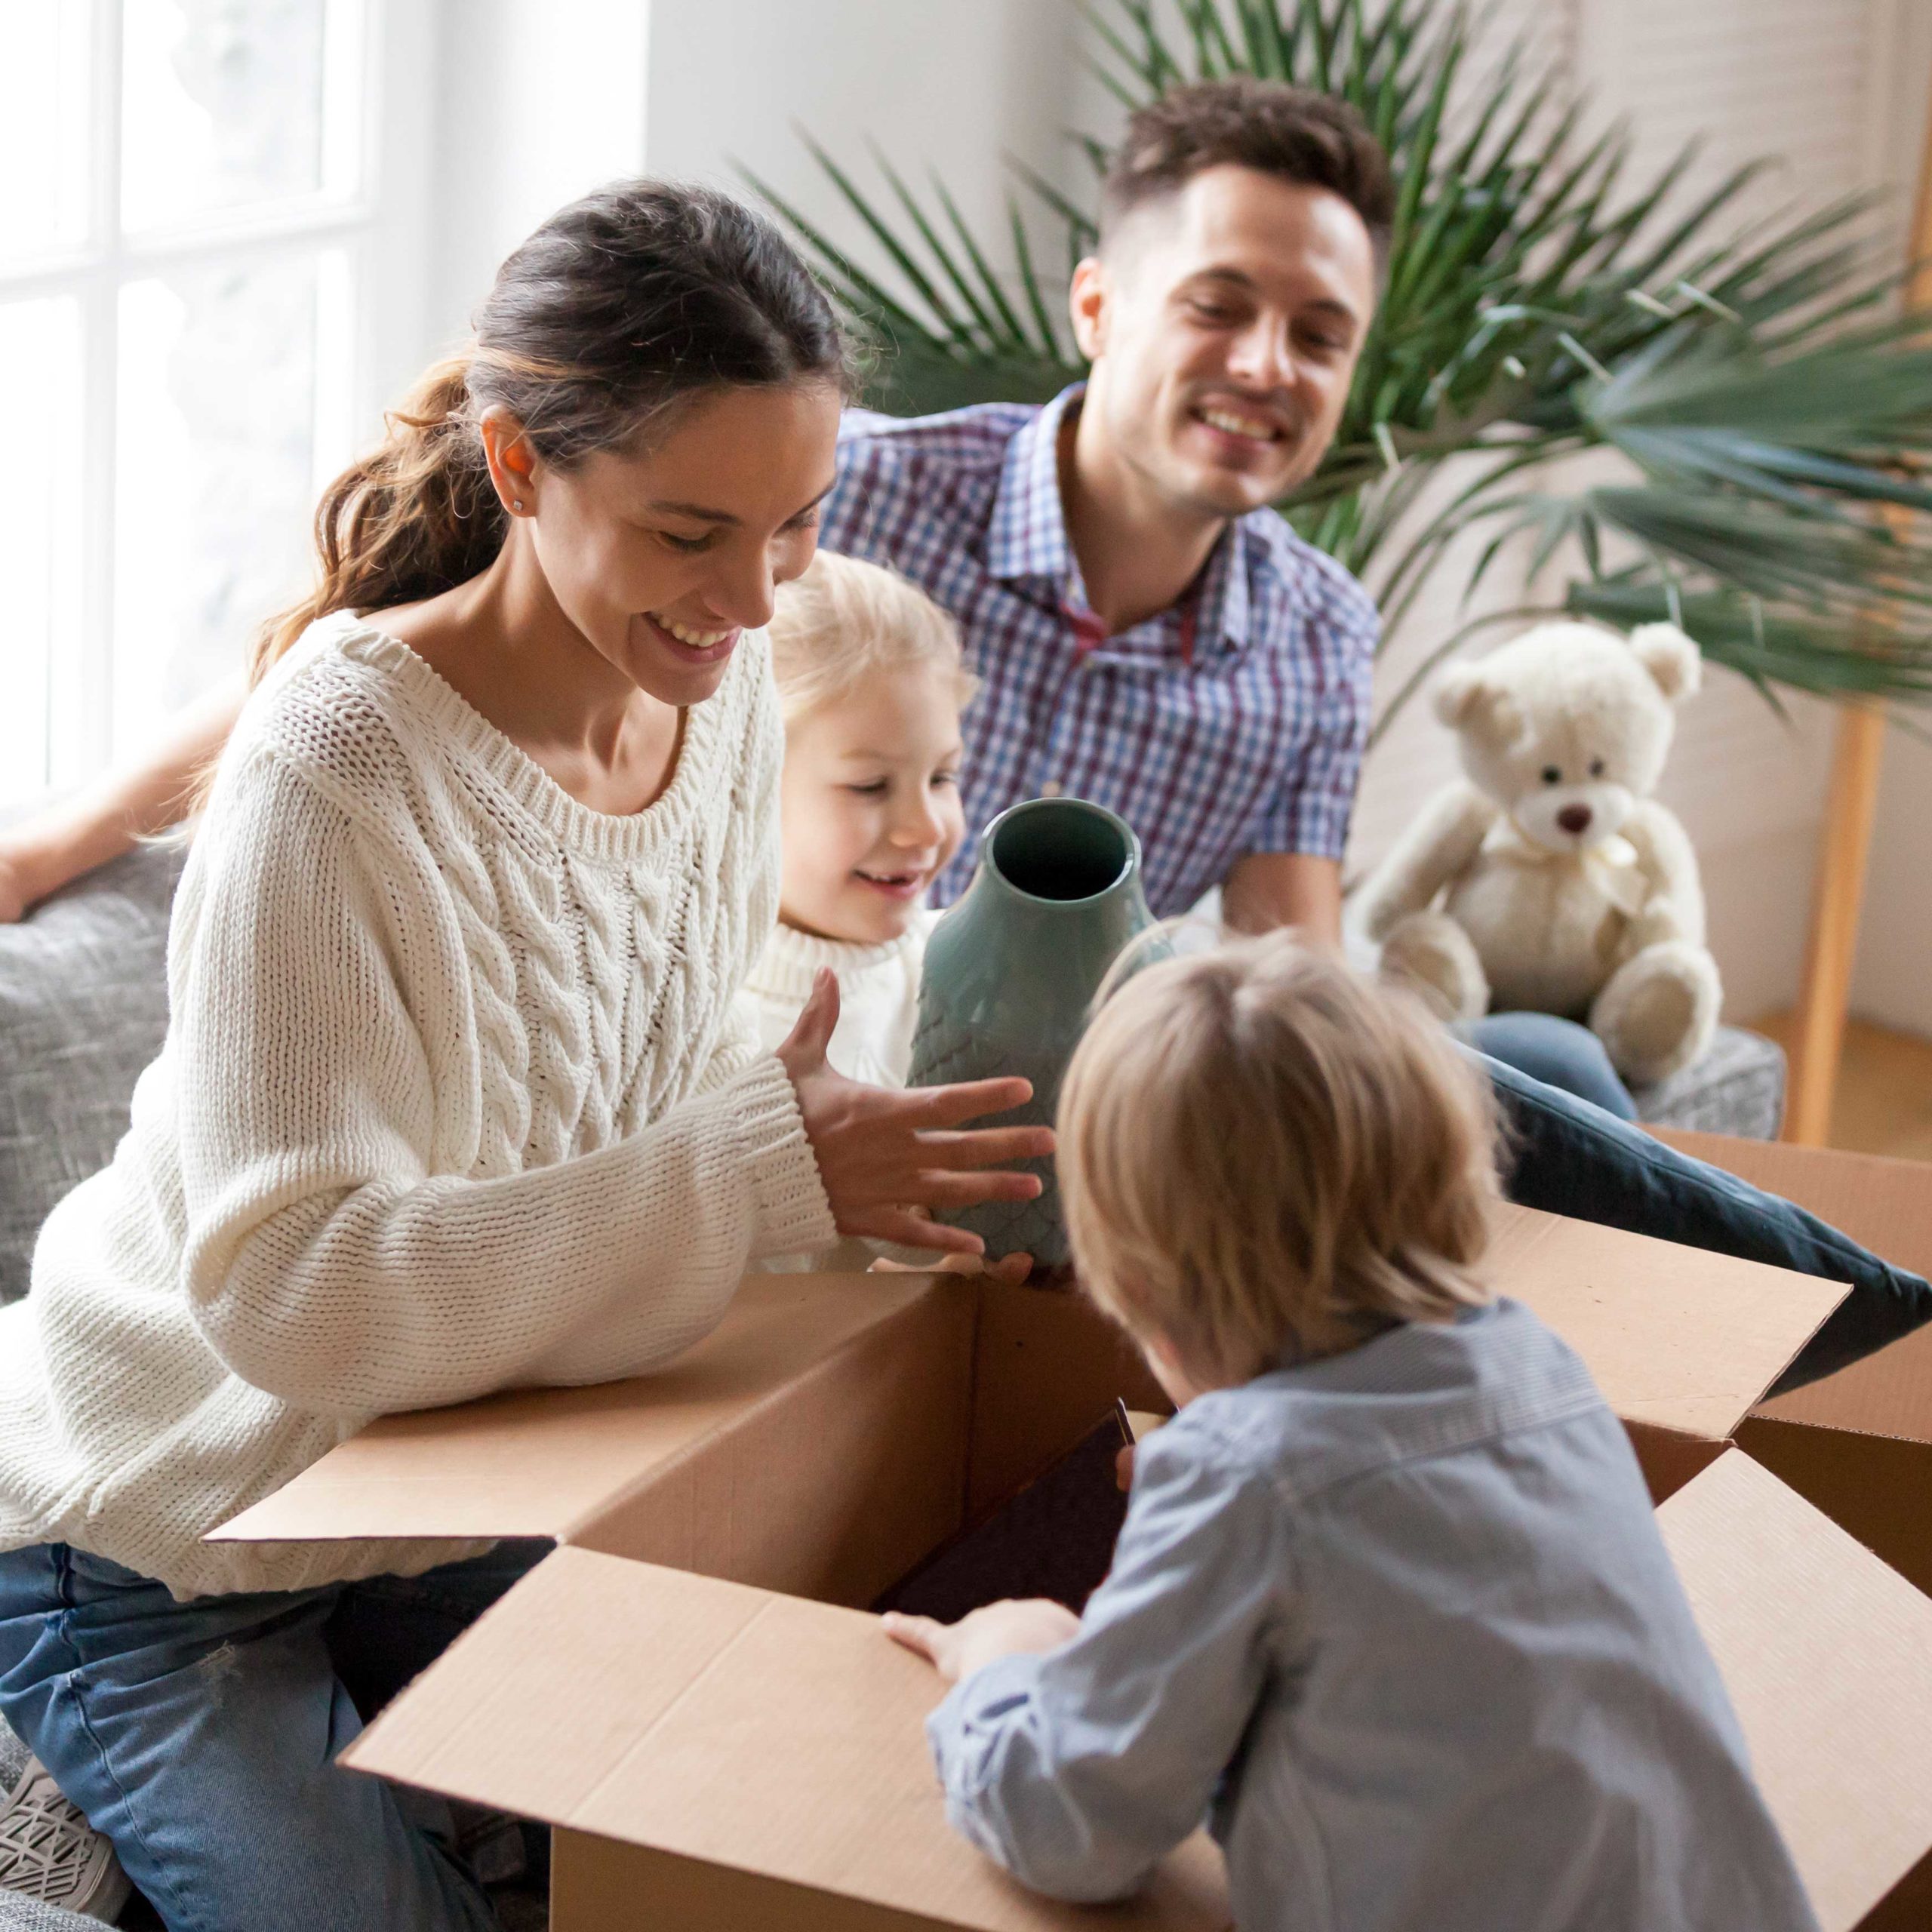 happy-family-with-kids-unpacking-boxes-moving-into-new-homea